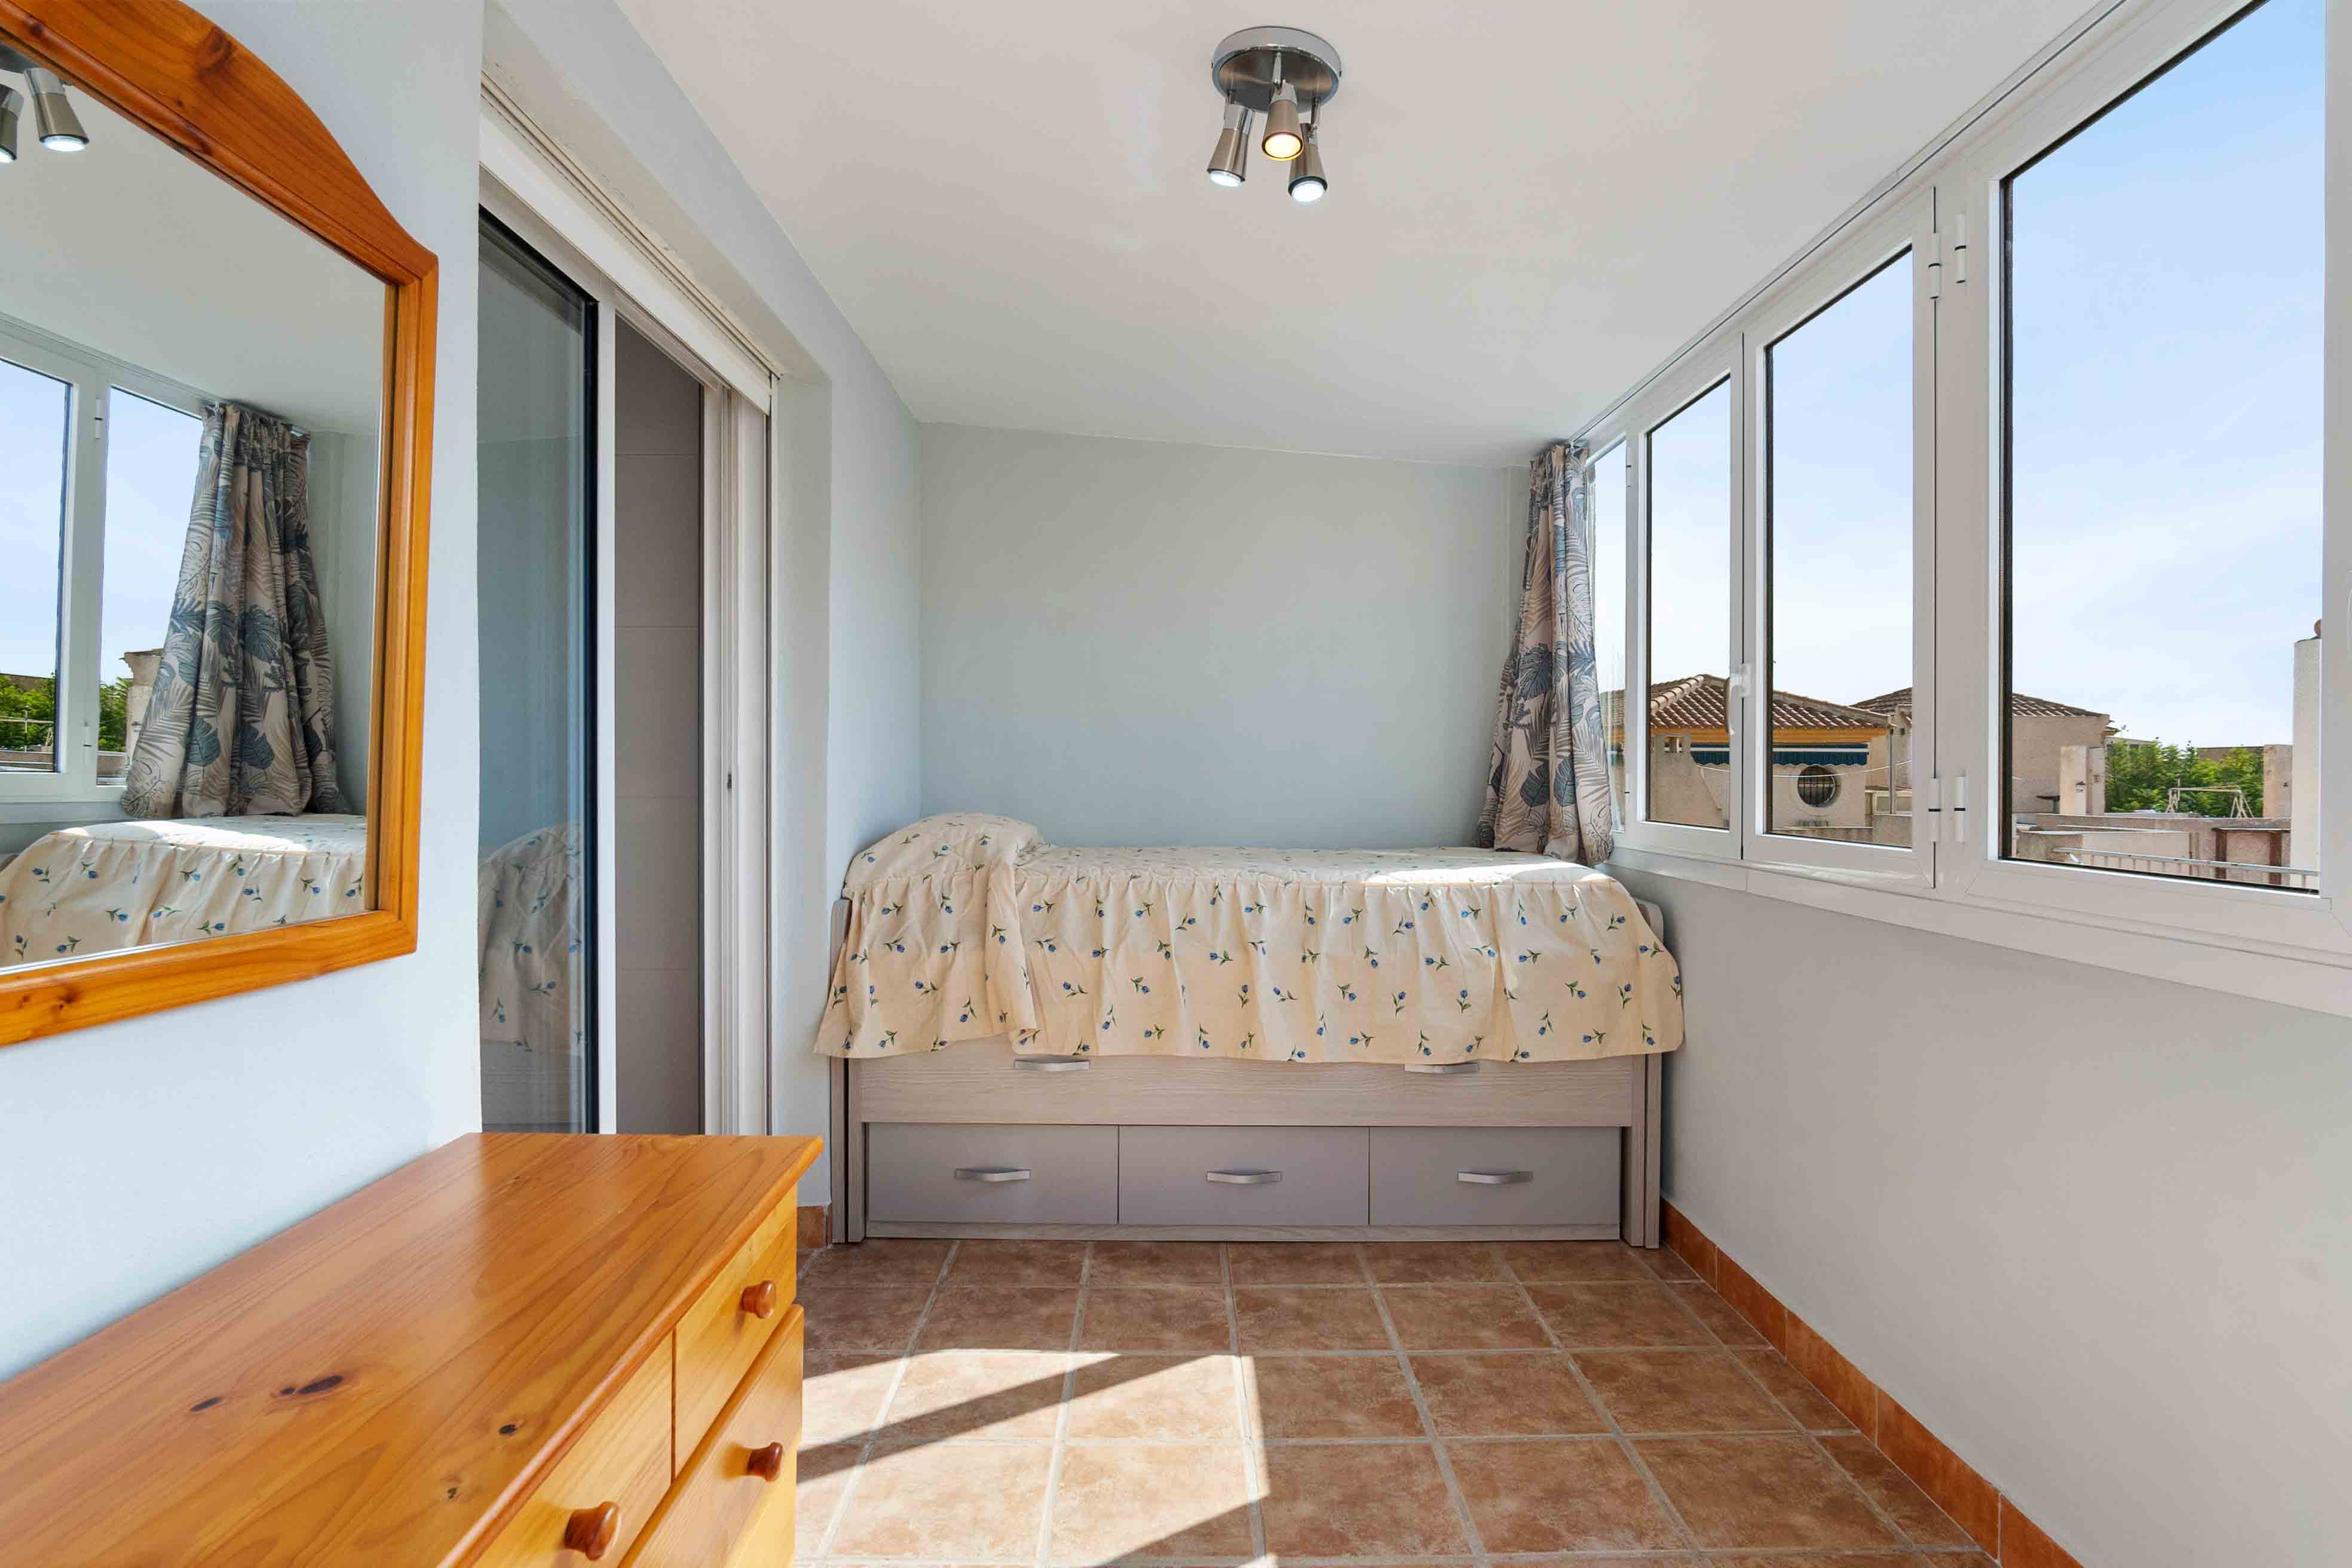 3405-03756. Town House in Orihuela Costa